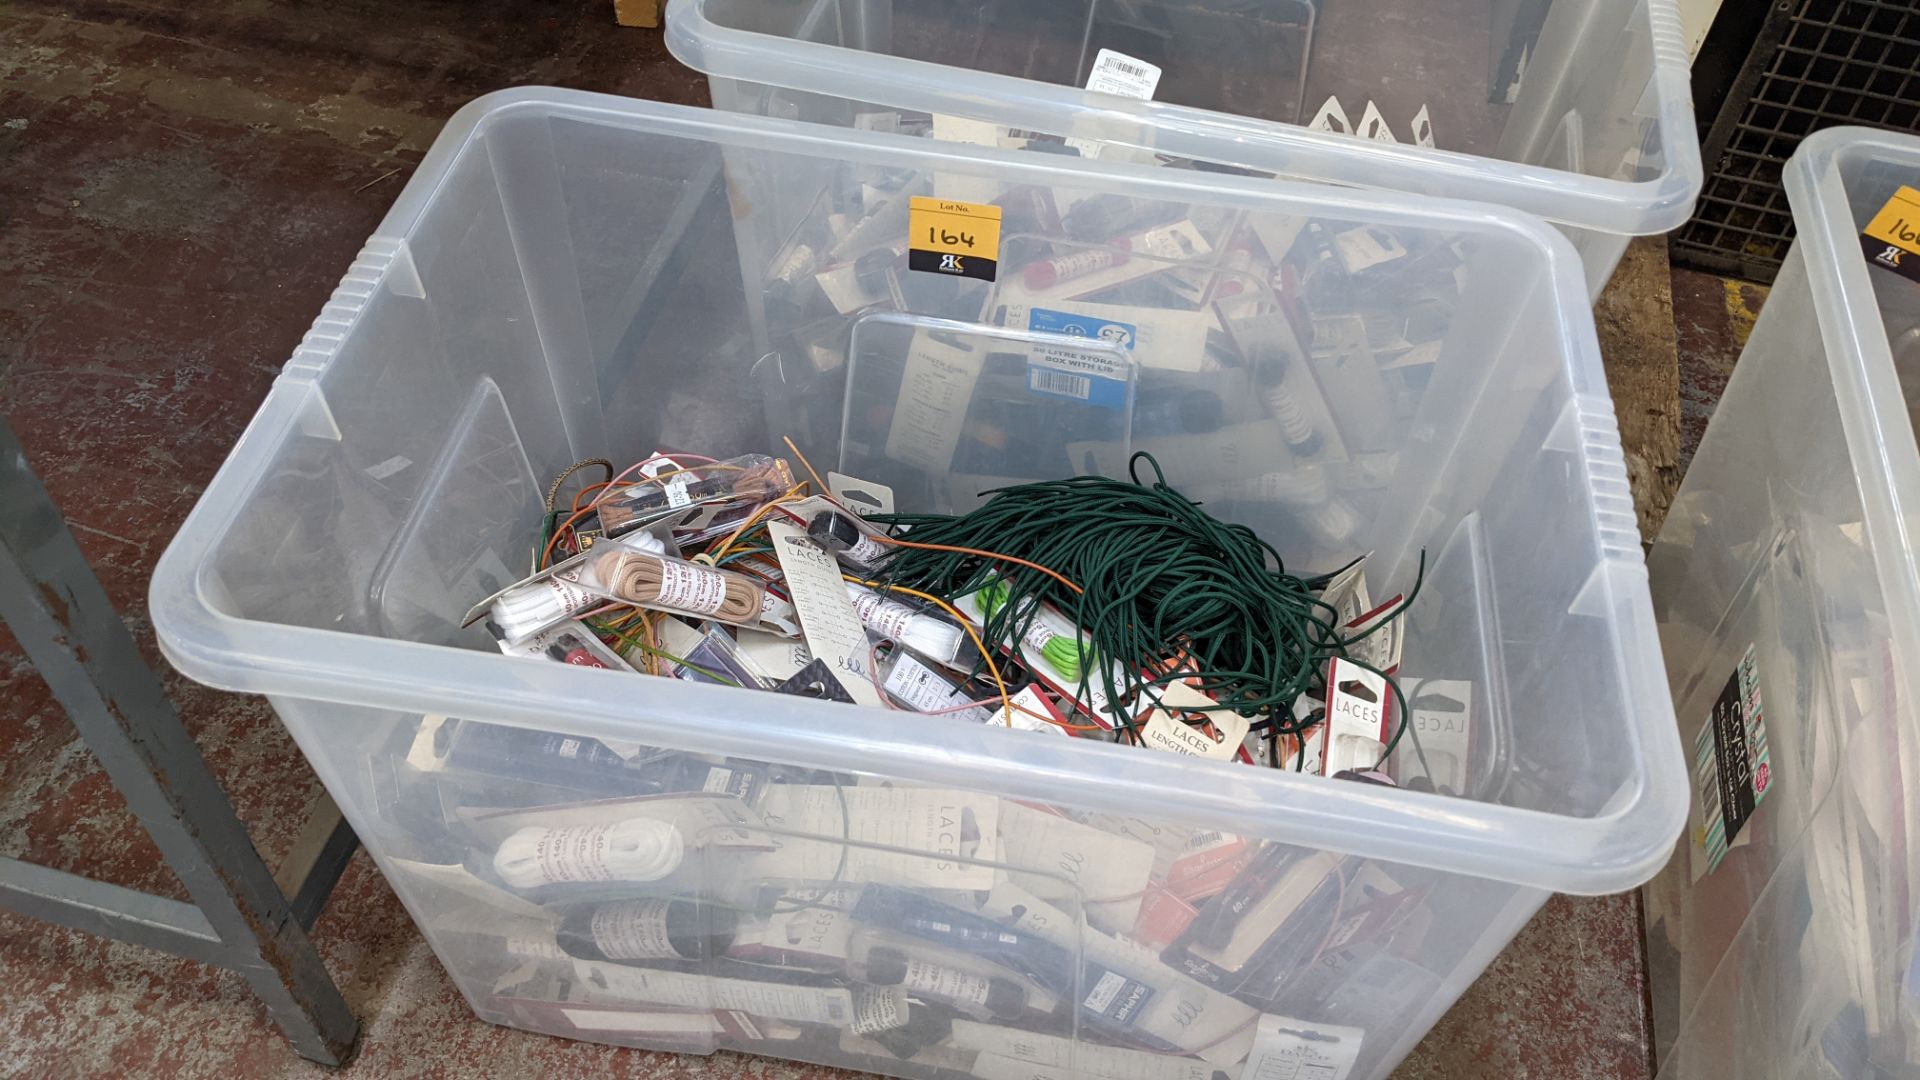 The contents of a crate of shoelaces